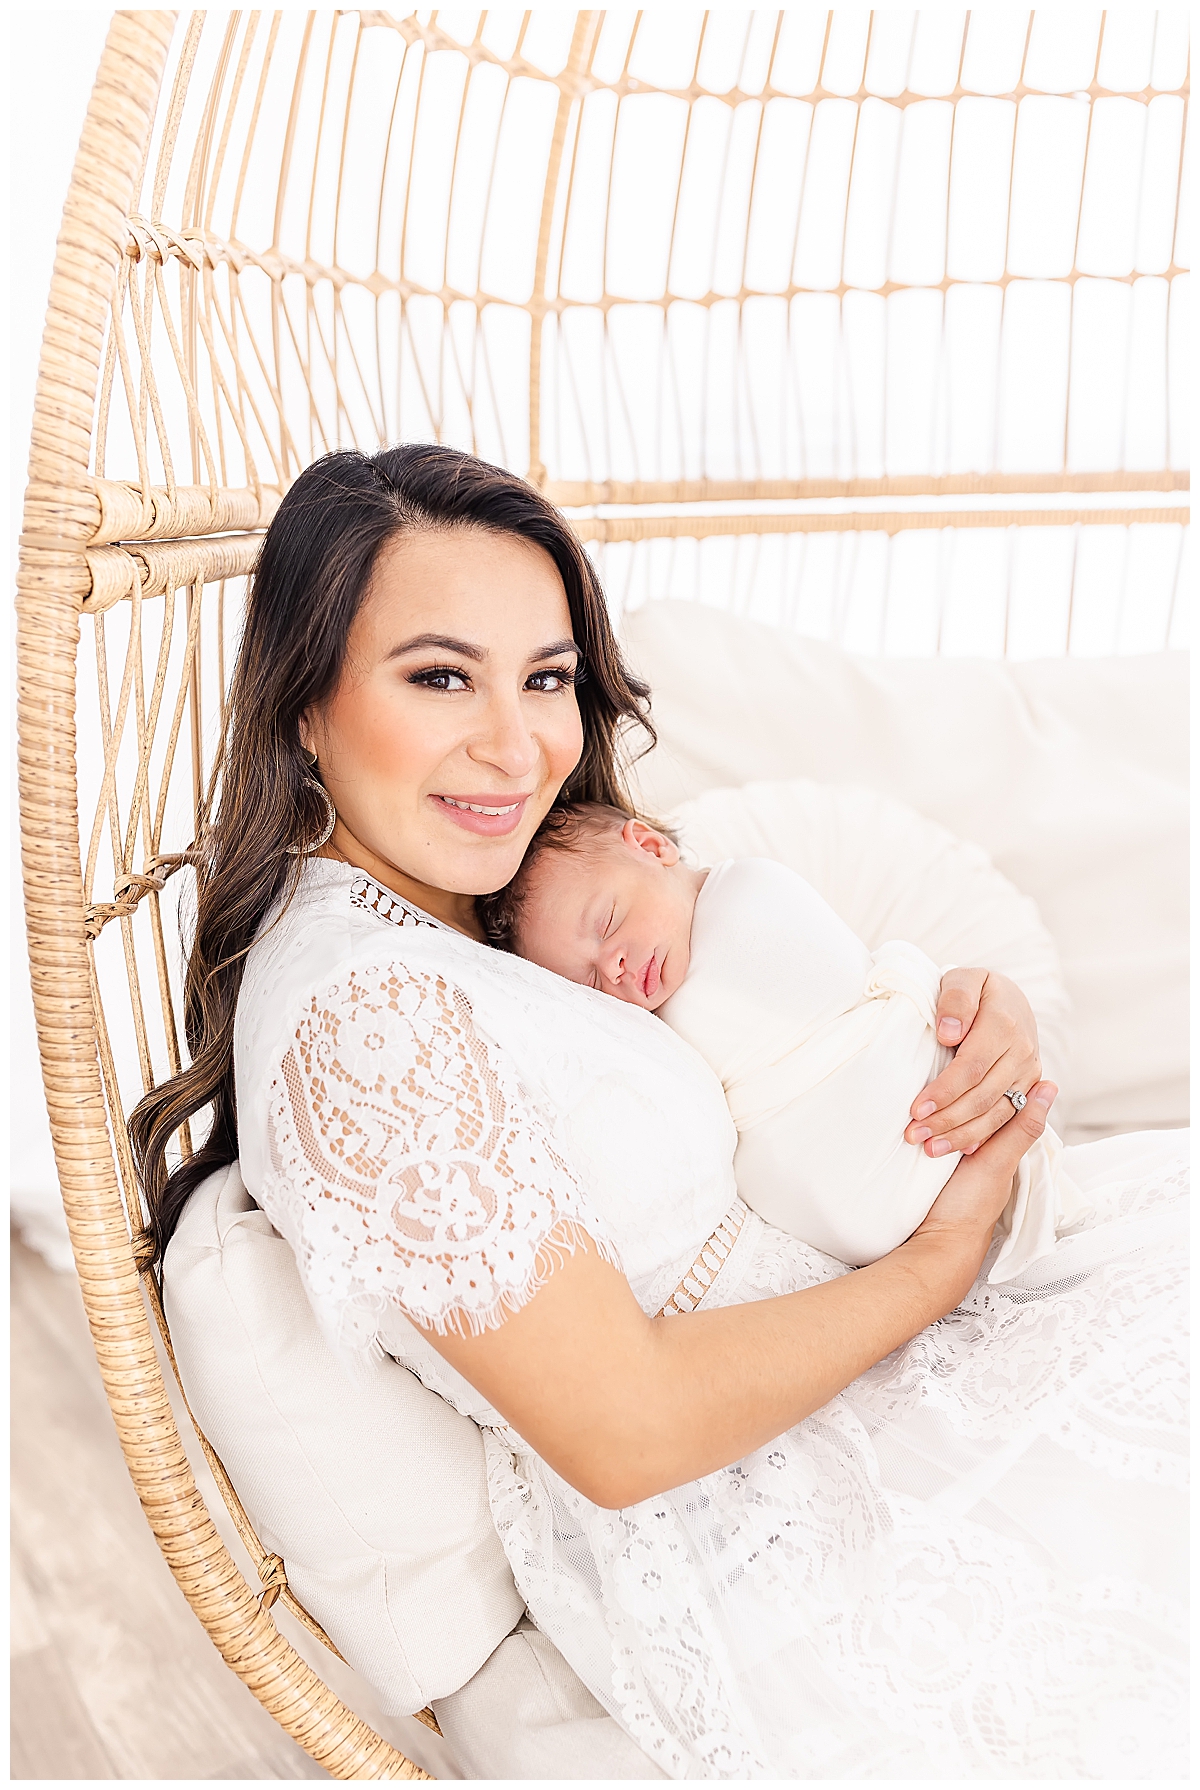 Newborn held by mom in white lace dress in whicker chair